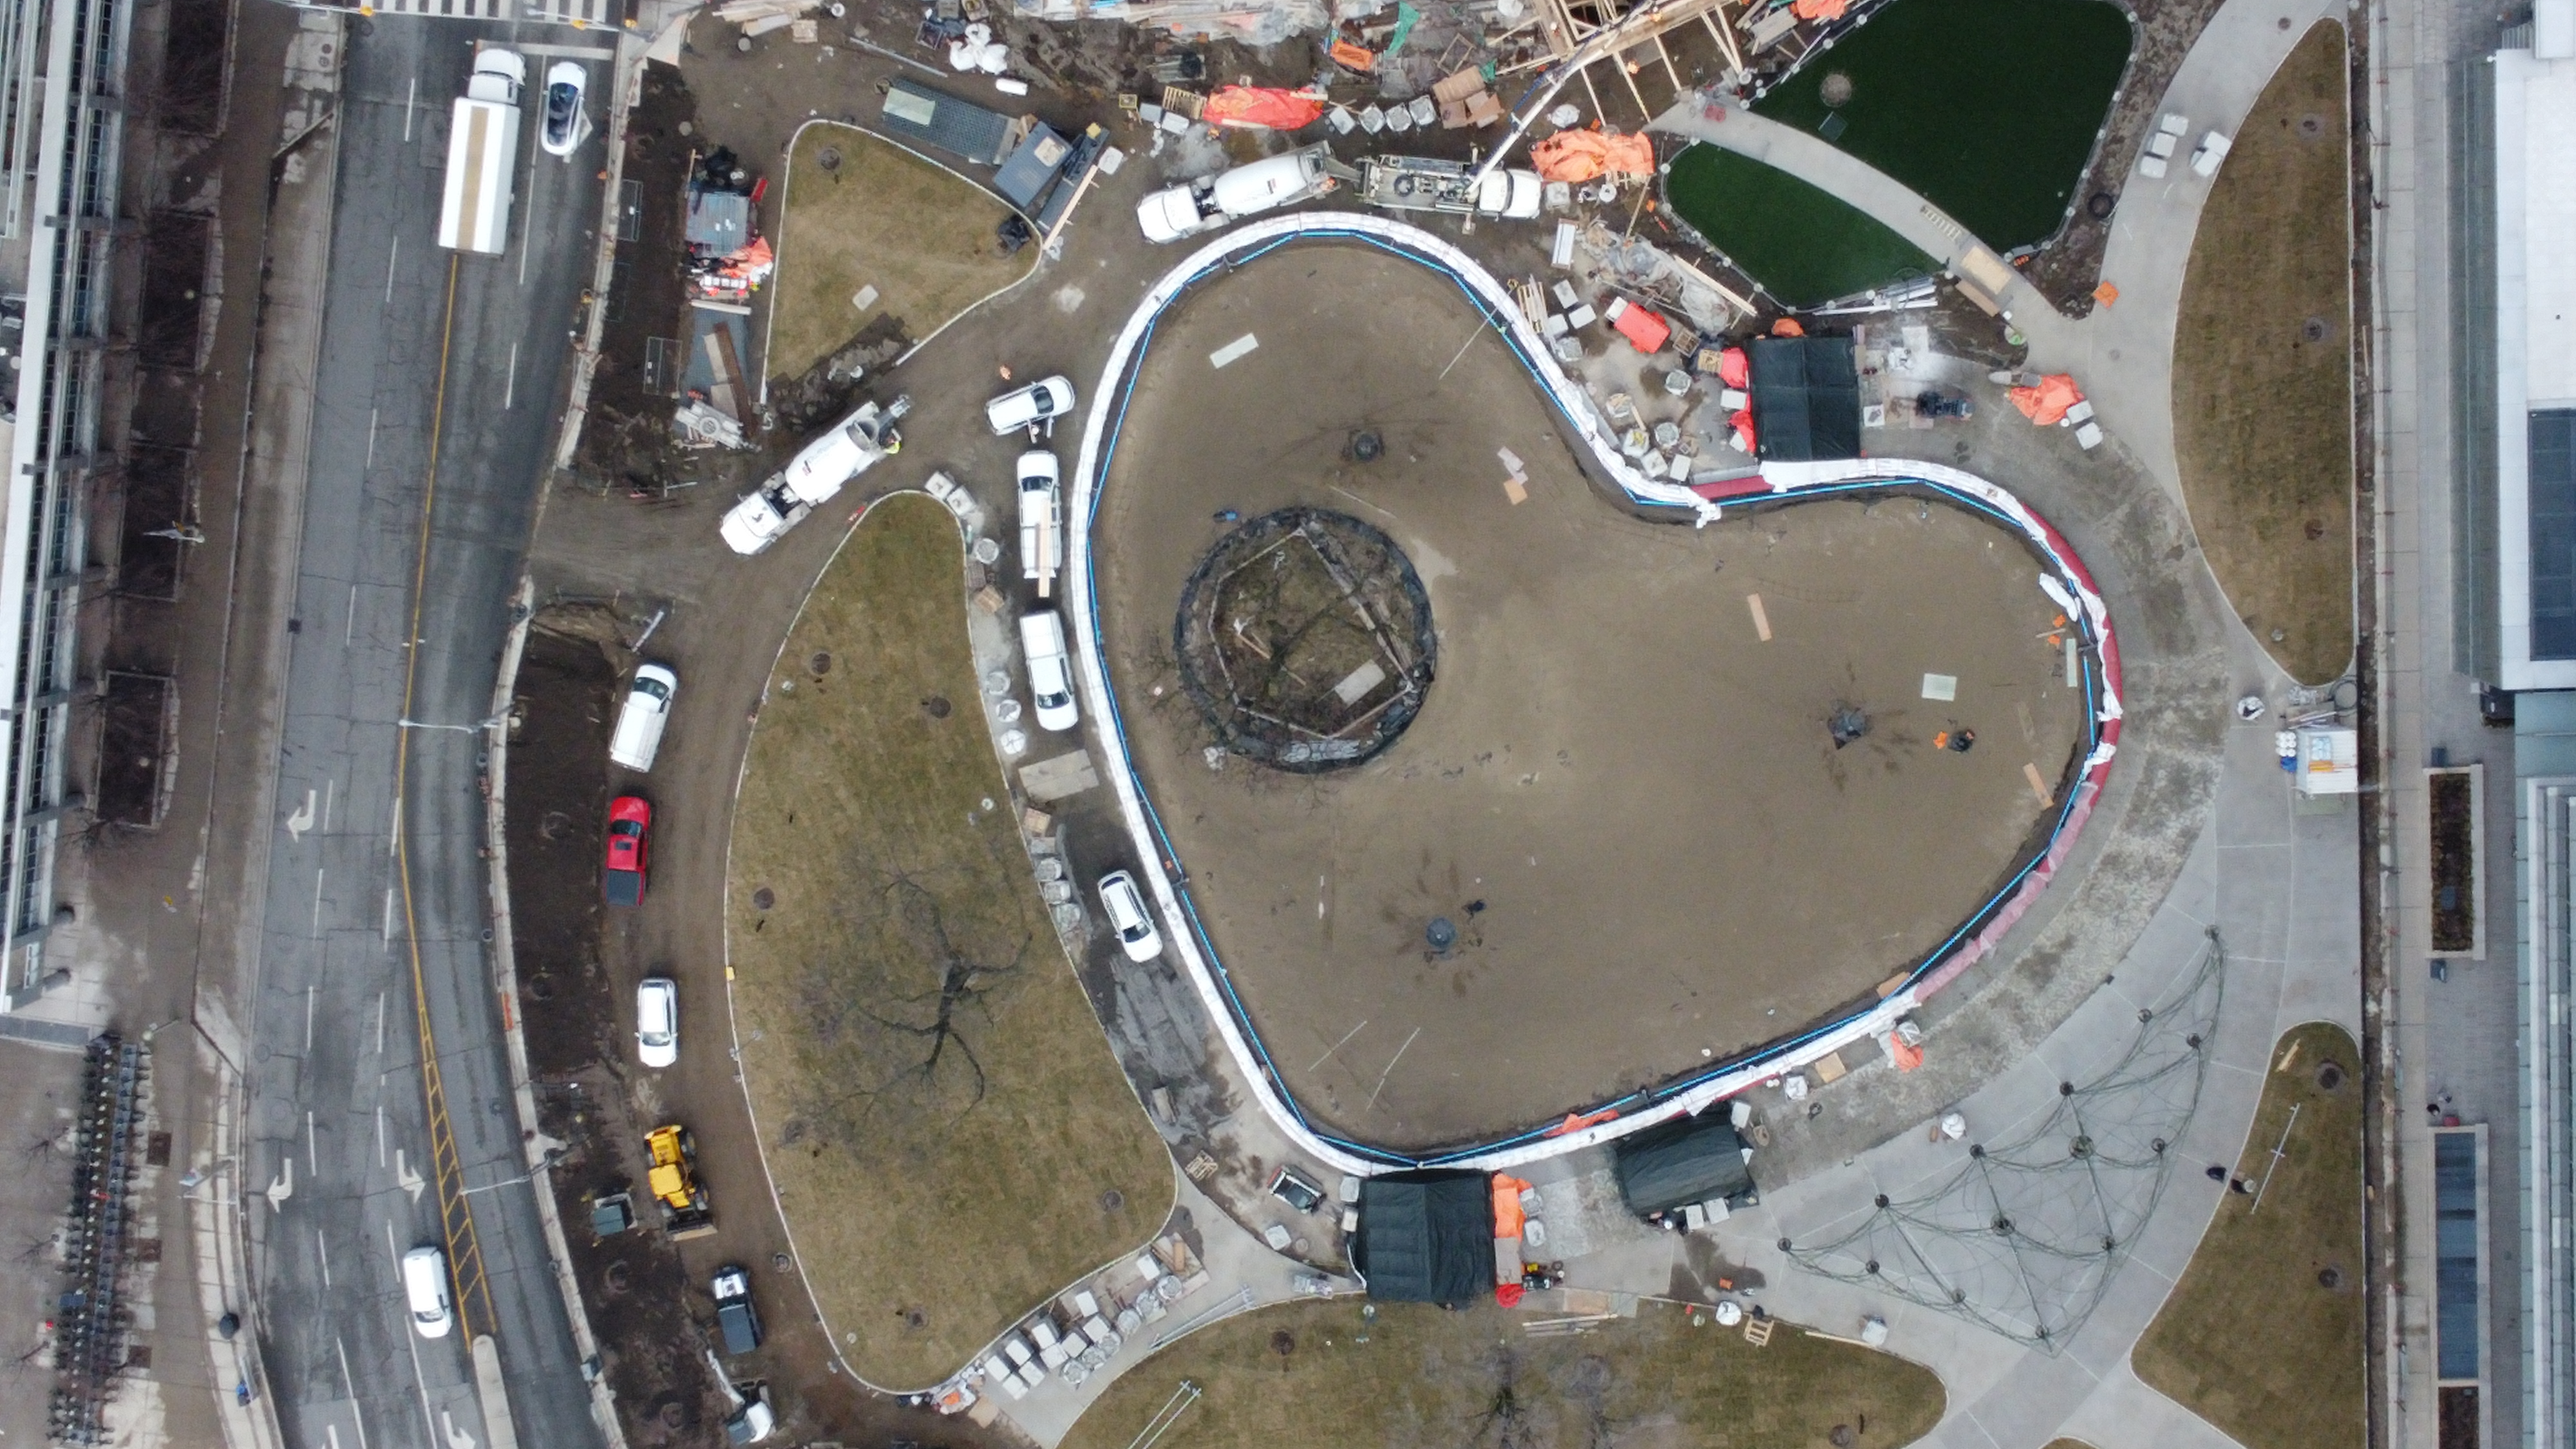 An aerial image taken by a drone showing the construction progress for the new park, which shows the centre of the park outlined as a large heart shape and ongoing landscaping around this area, including dirt paths with patches of grass in irregular rounded shapes. The park is a construction site, with construction equipment ,cars, and dirt. 